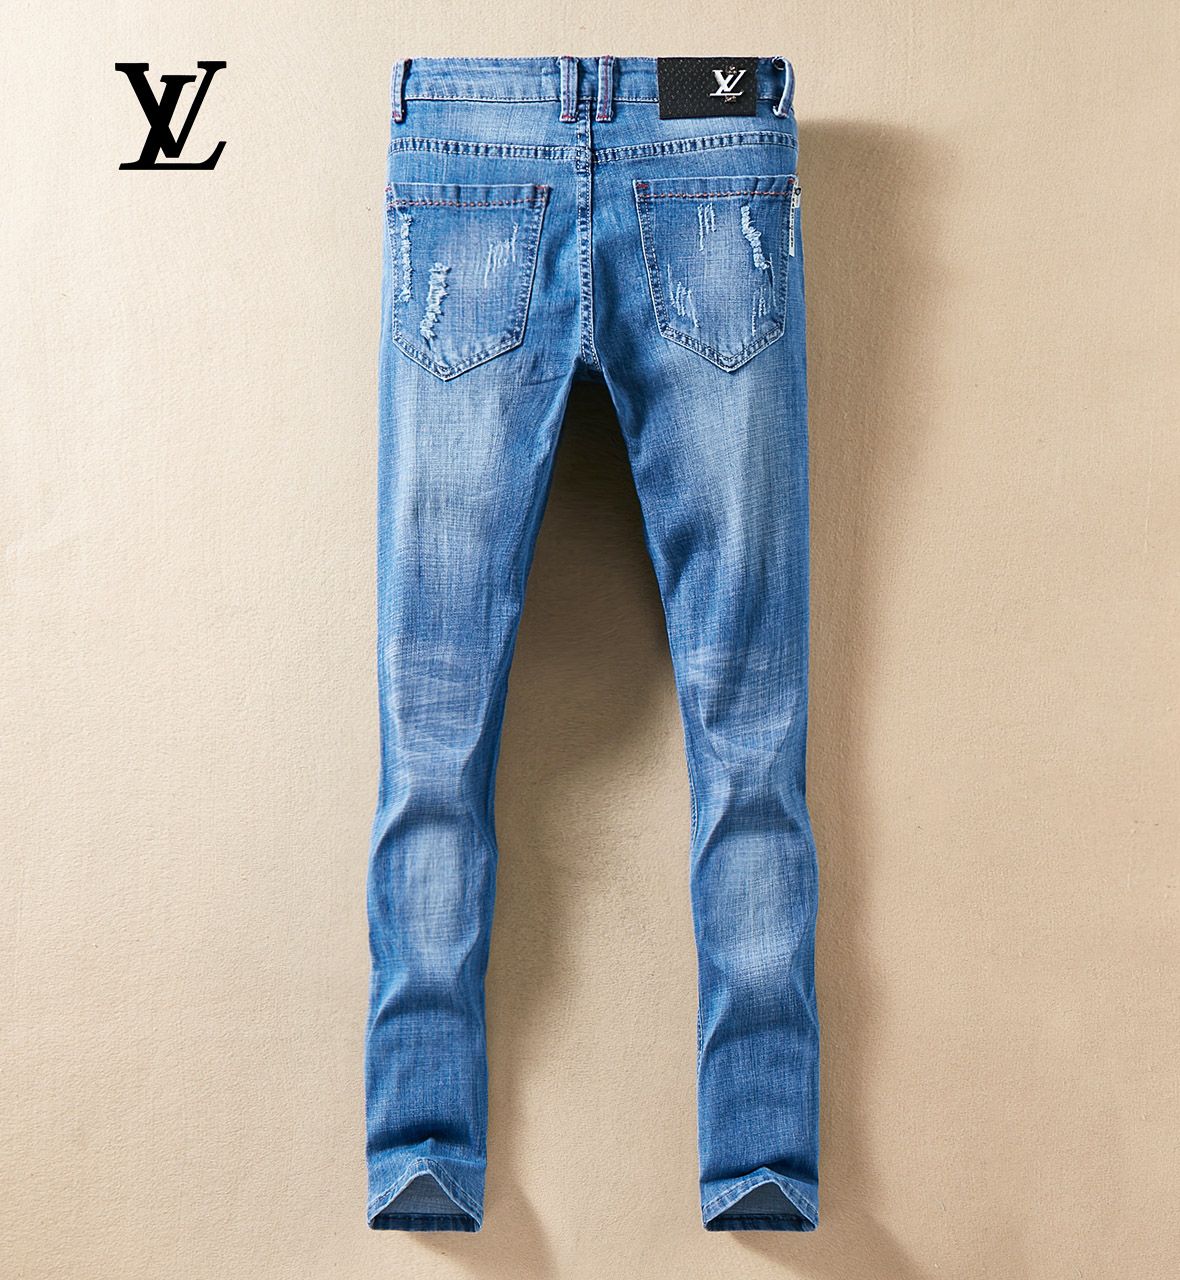 New Mens Denim Jeans Cultivate Ones Morality  Men Luxury Designer Brand 1LLV Jeans  1LEmbroidery From Manshirt, $44.68